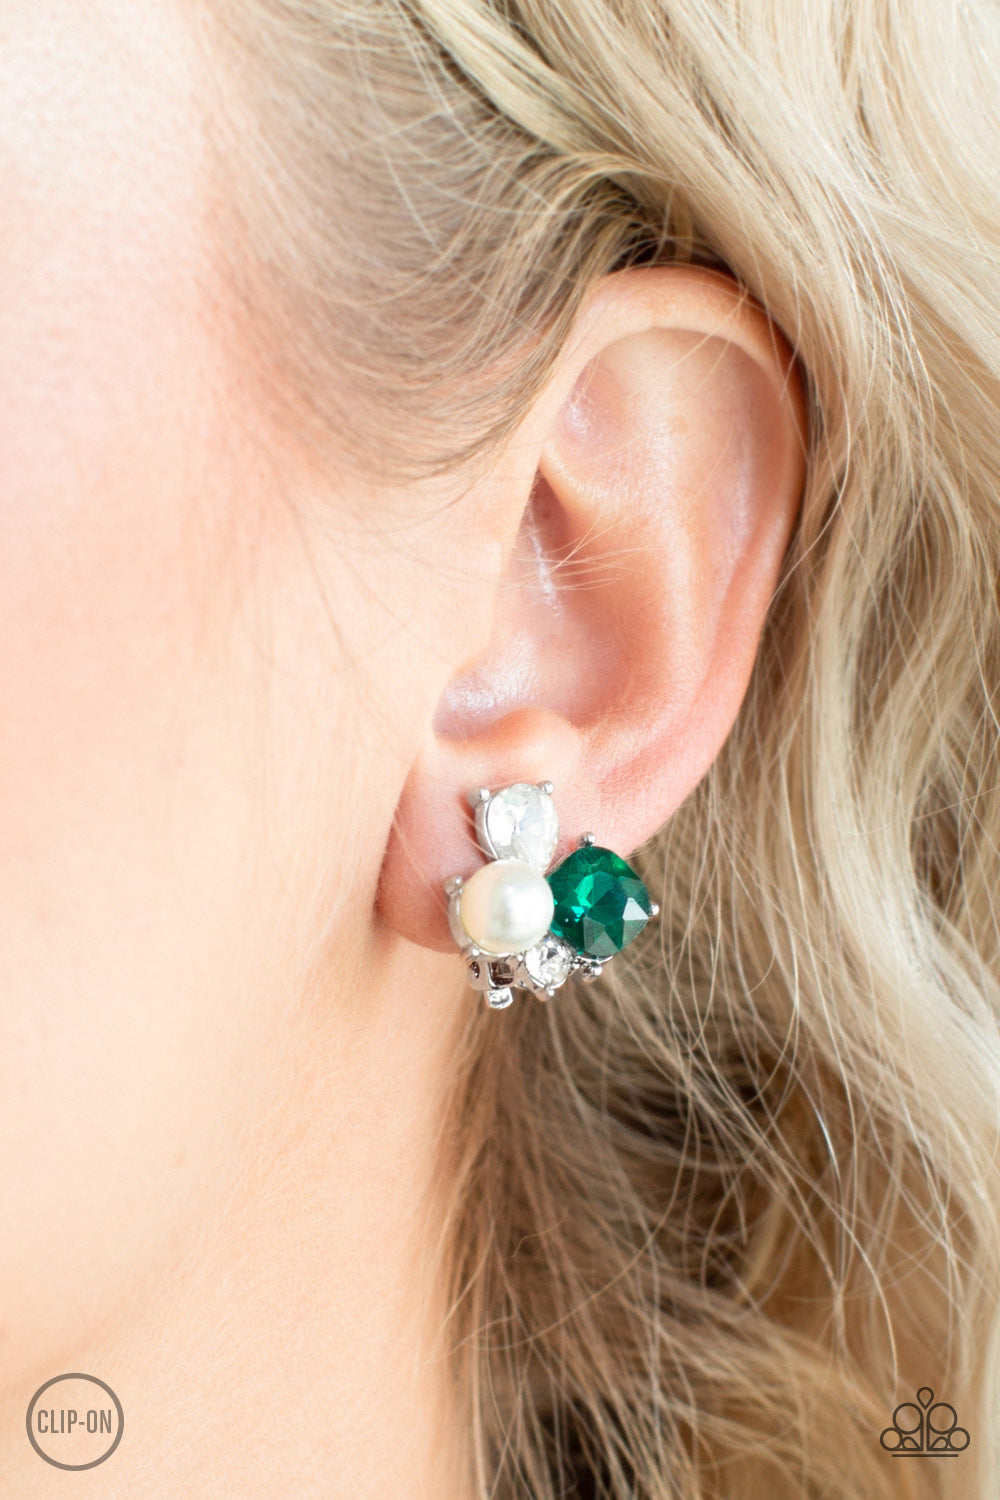 Highly High-Class Green Clip-On Earring - Paparazzi Accessories  Featuring a classic pearl, mismatched green and white rhinestones join into a radiant frame. Earring attaches to a standard clip-on fitting. All Paparazzi Accessories are lead free and nickel free!  Sold as one pair of clip-on earrings.